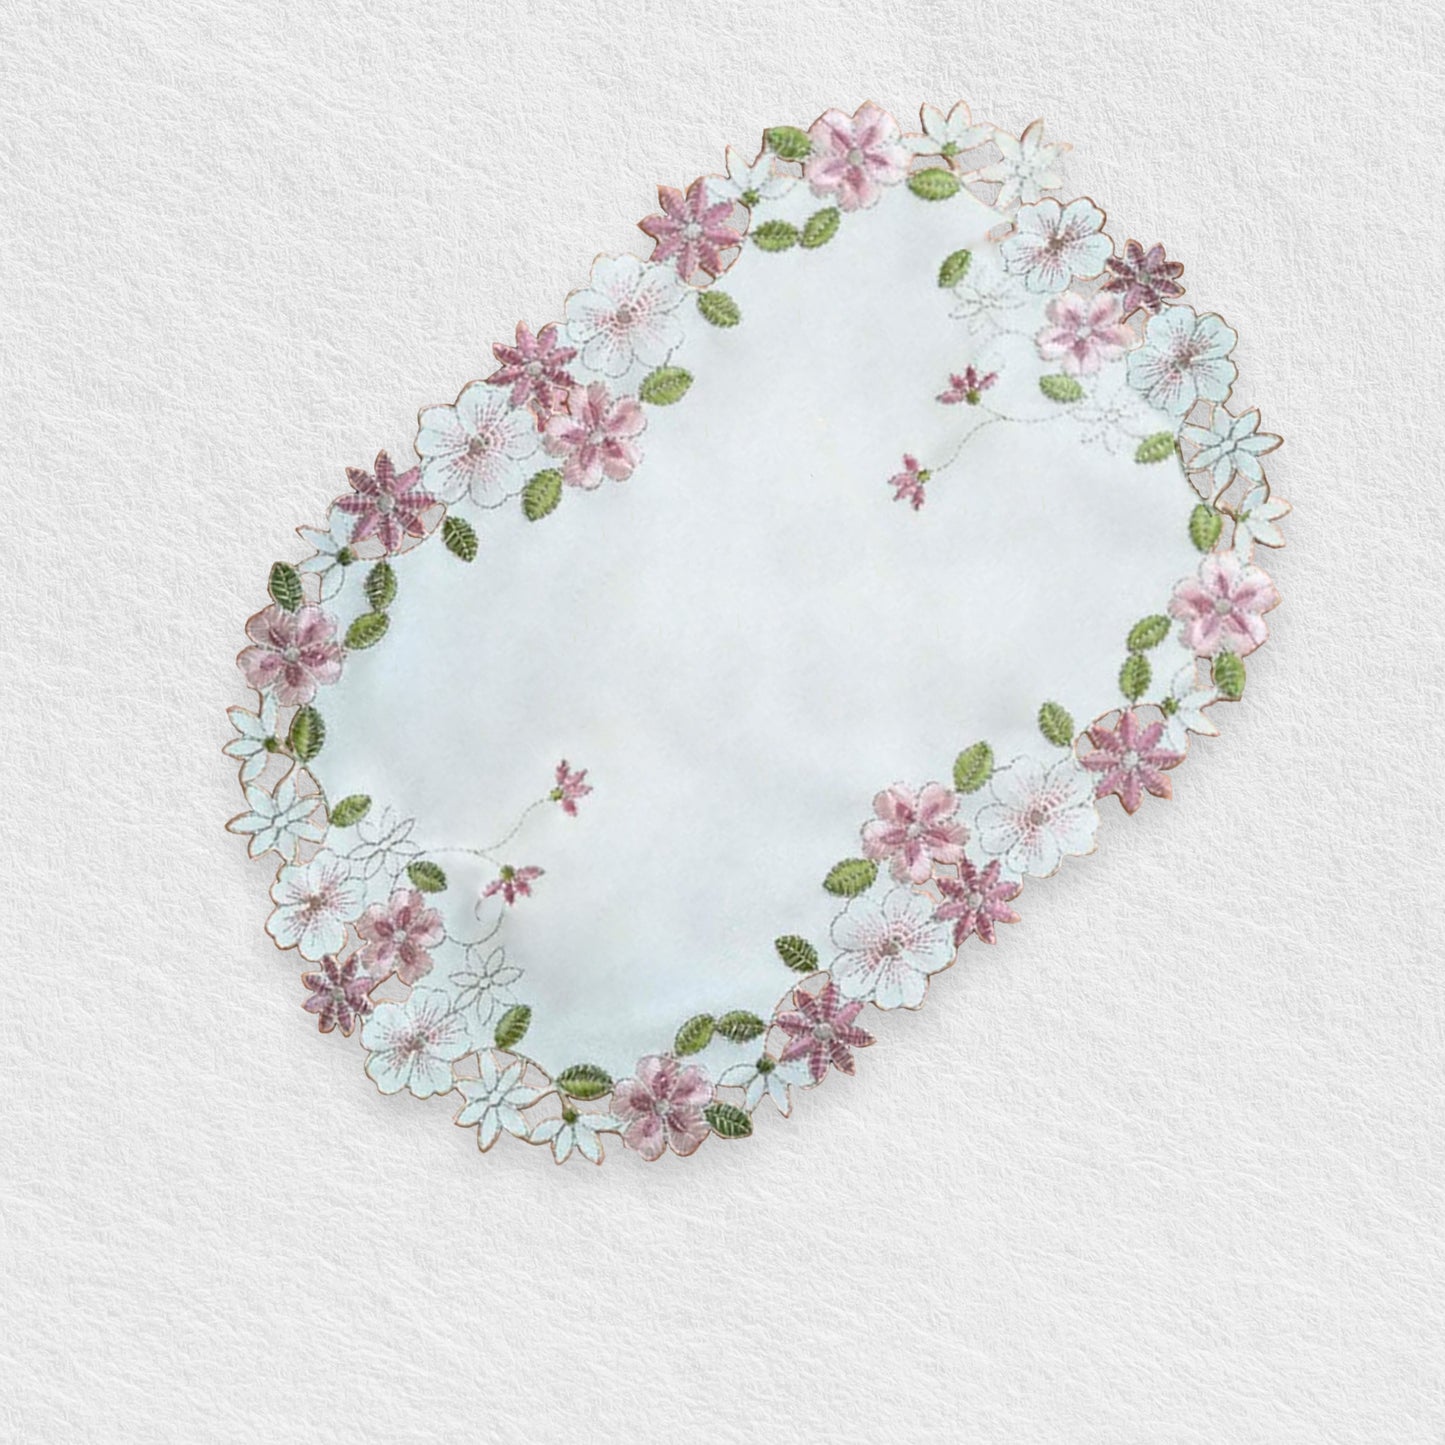 Rose Oval Lace Placemat